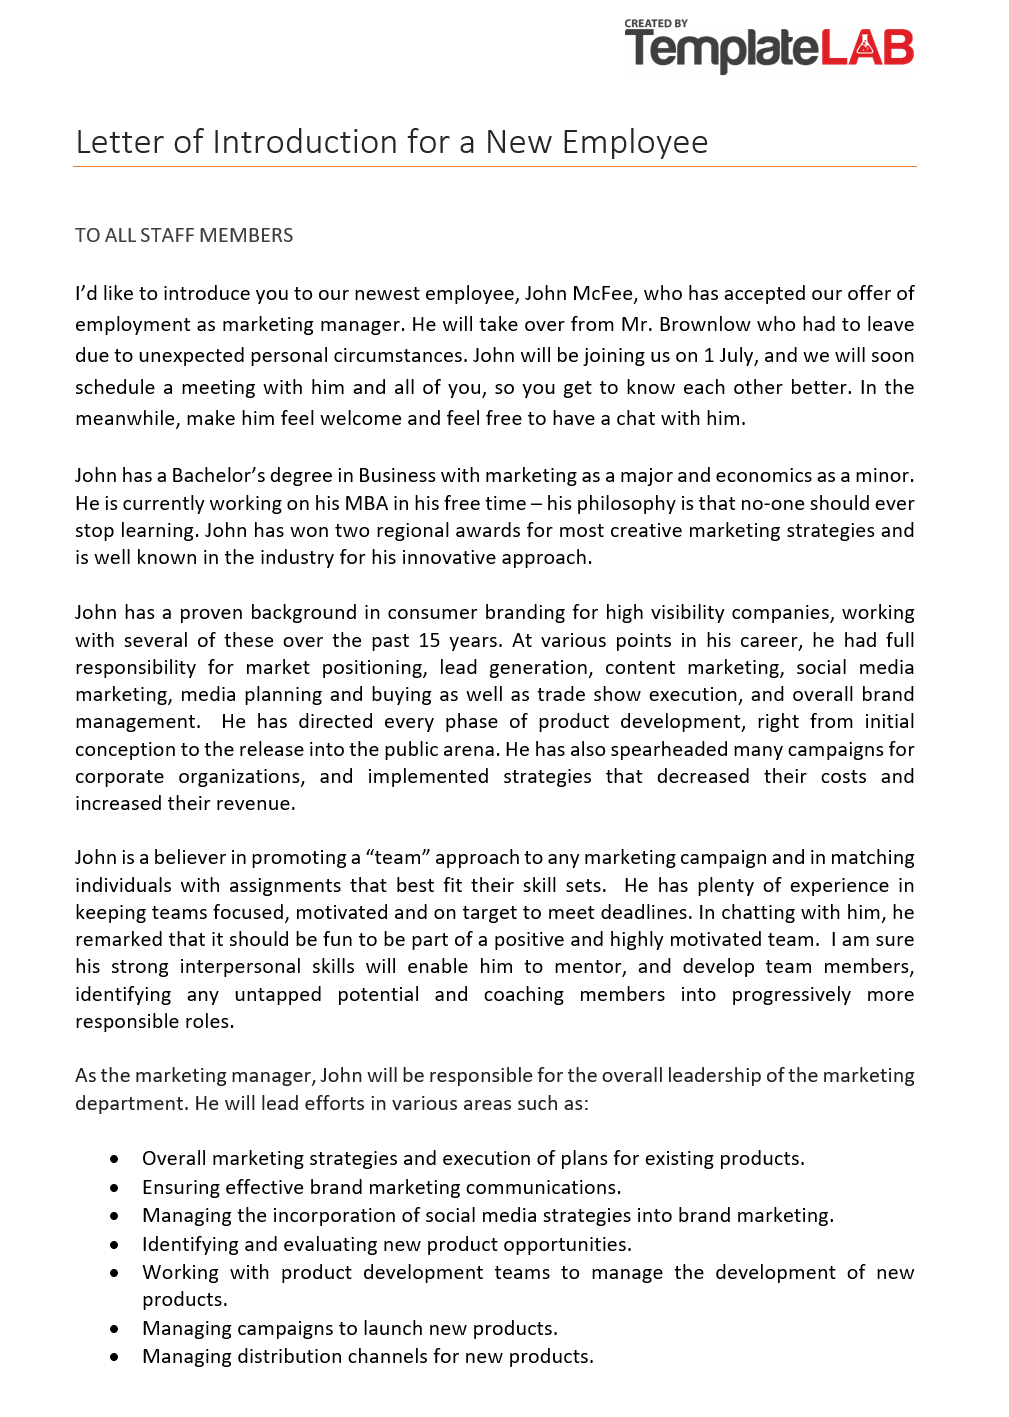 sample letter of introduction for research purposes